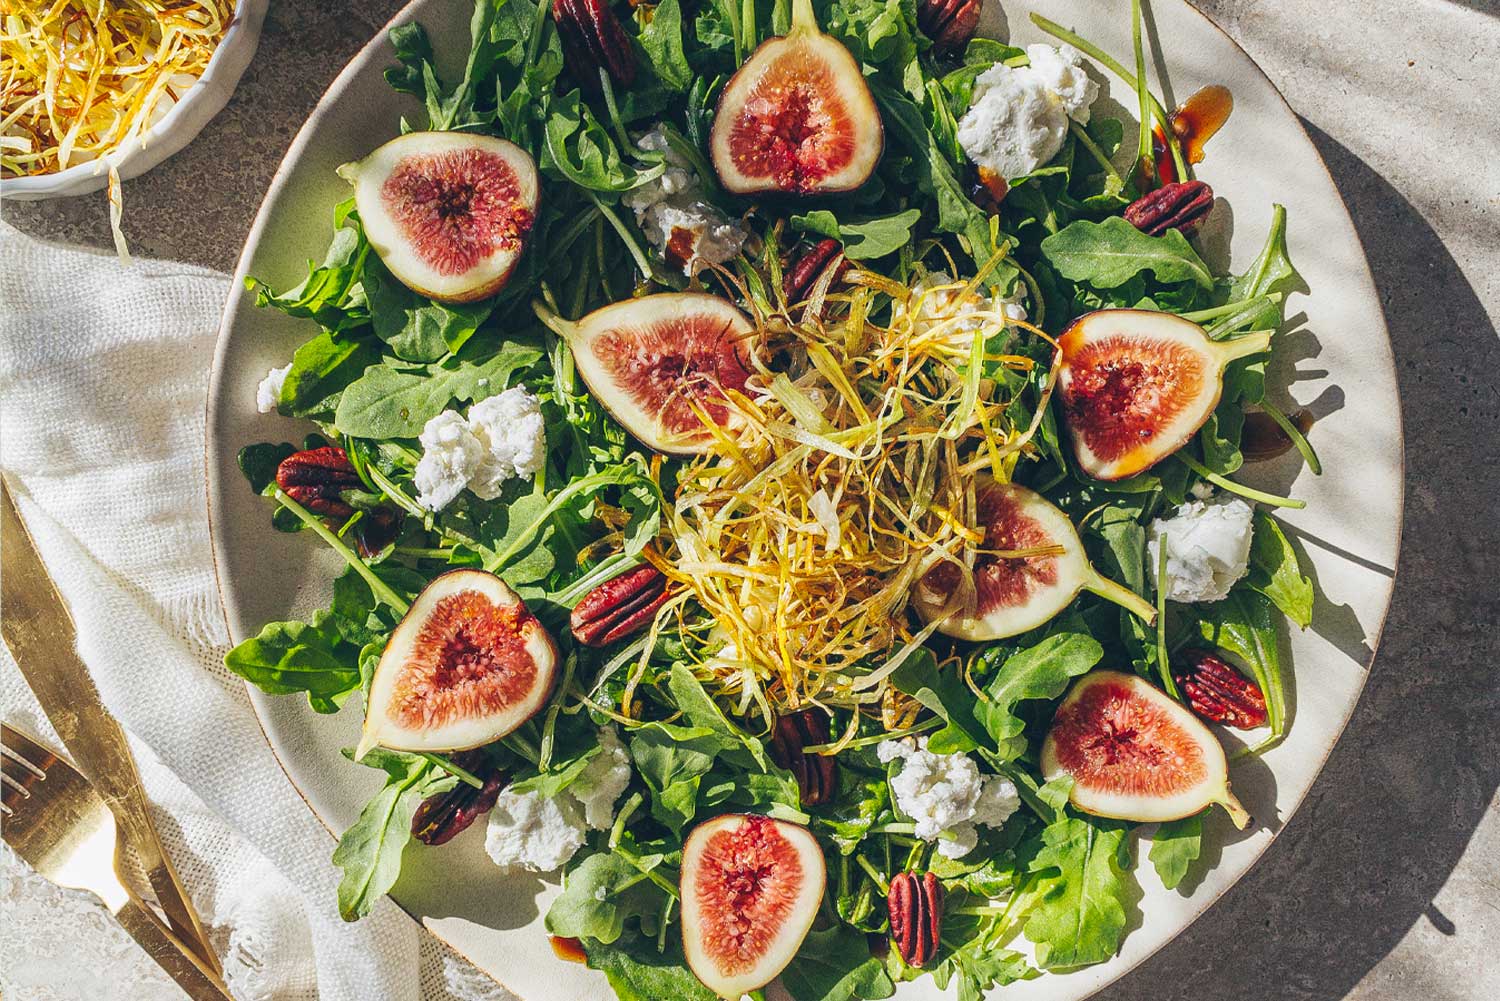 A plate filled with a fresh, late summer, fall seasonal salad of fresh figs, goat cheese, arugula, and toasted pecans, topped with a mound of frizzled leeks.